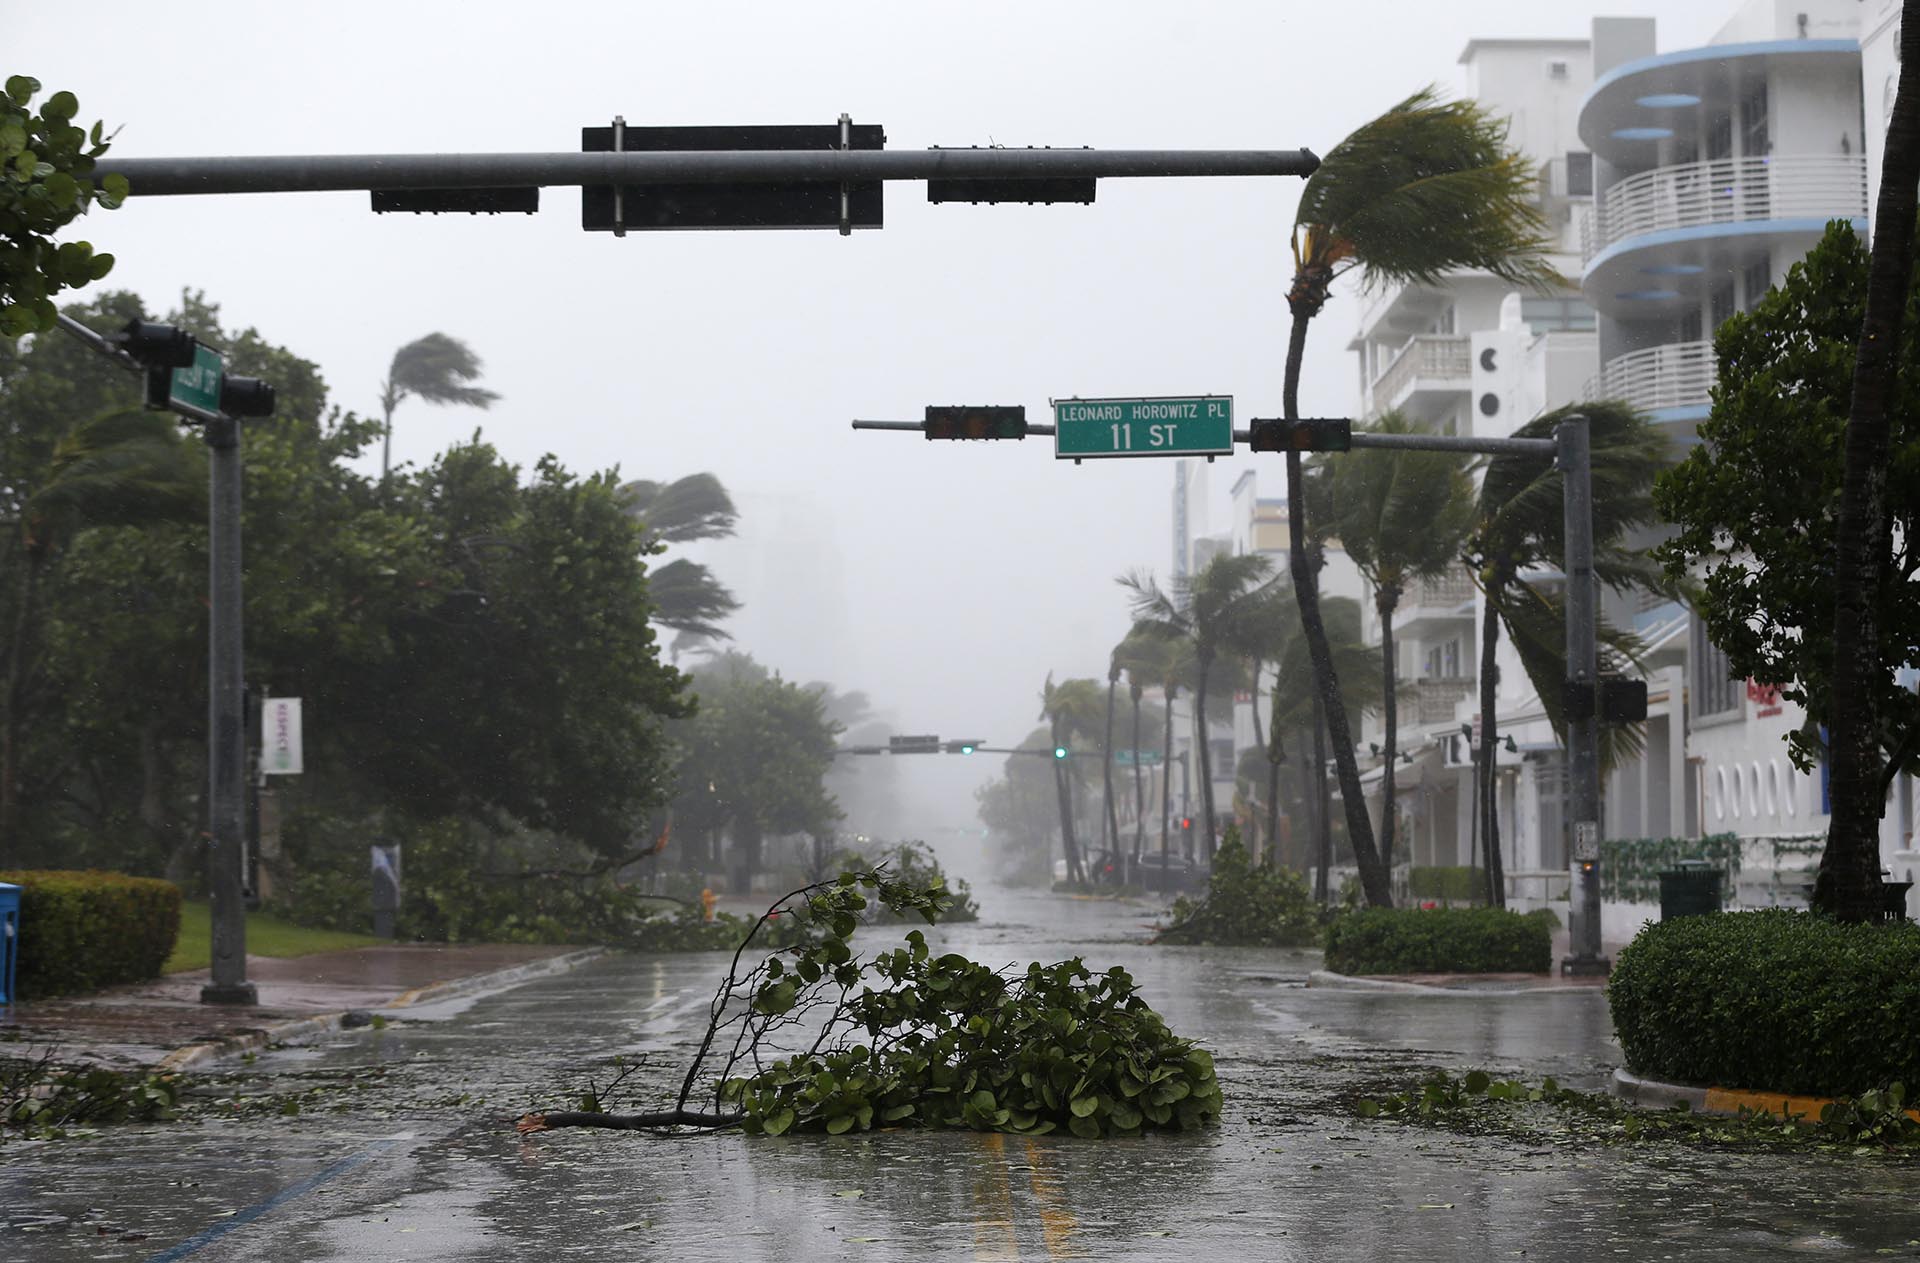 Debris is strewn across a normally busy street in South Beach as Hurricane Irma passes by, Sunday, Sept. 10, 2017, in Miami Beach, Fla. (AP Photo/Wilfredo Lee)